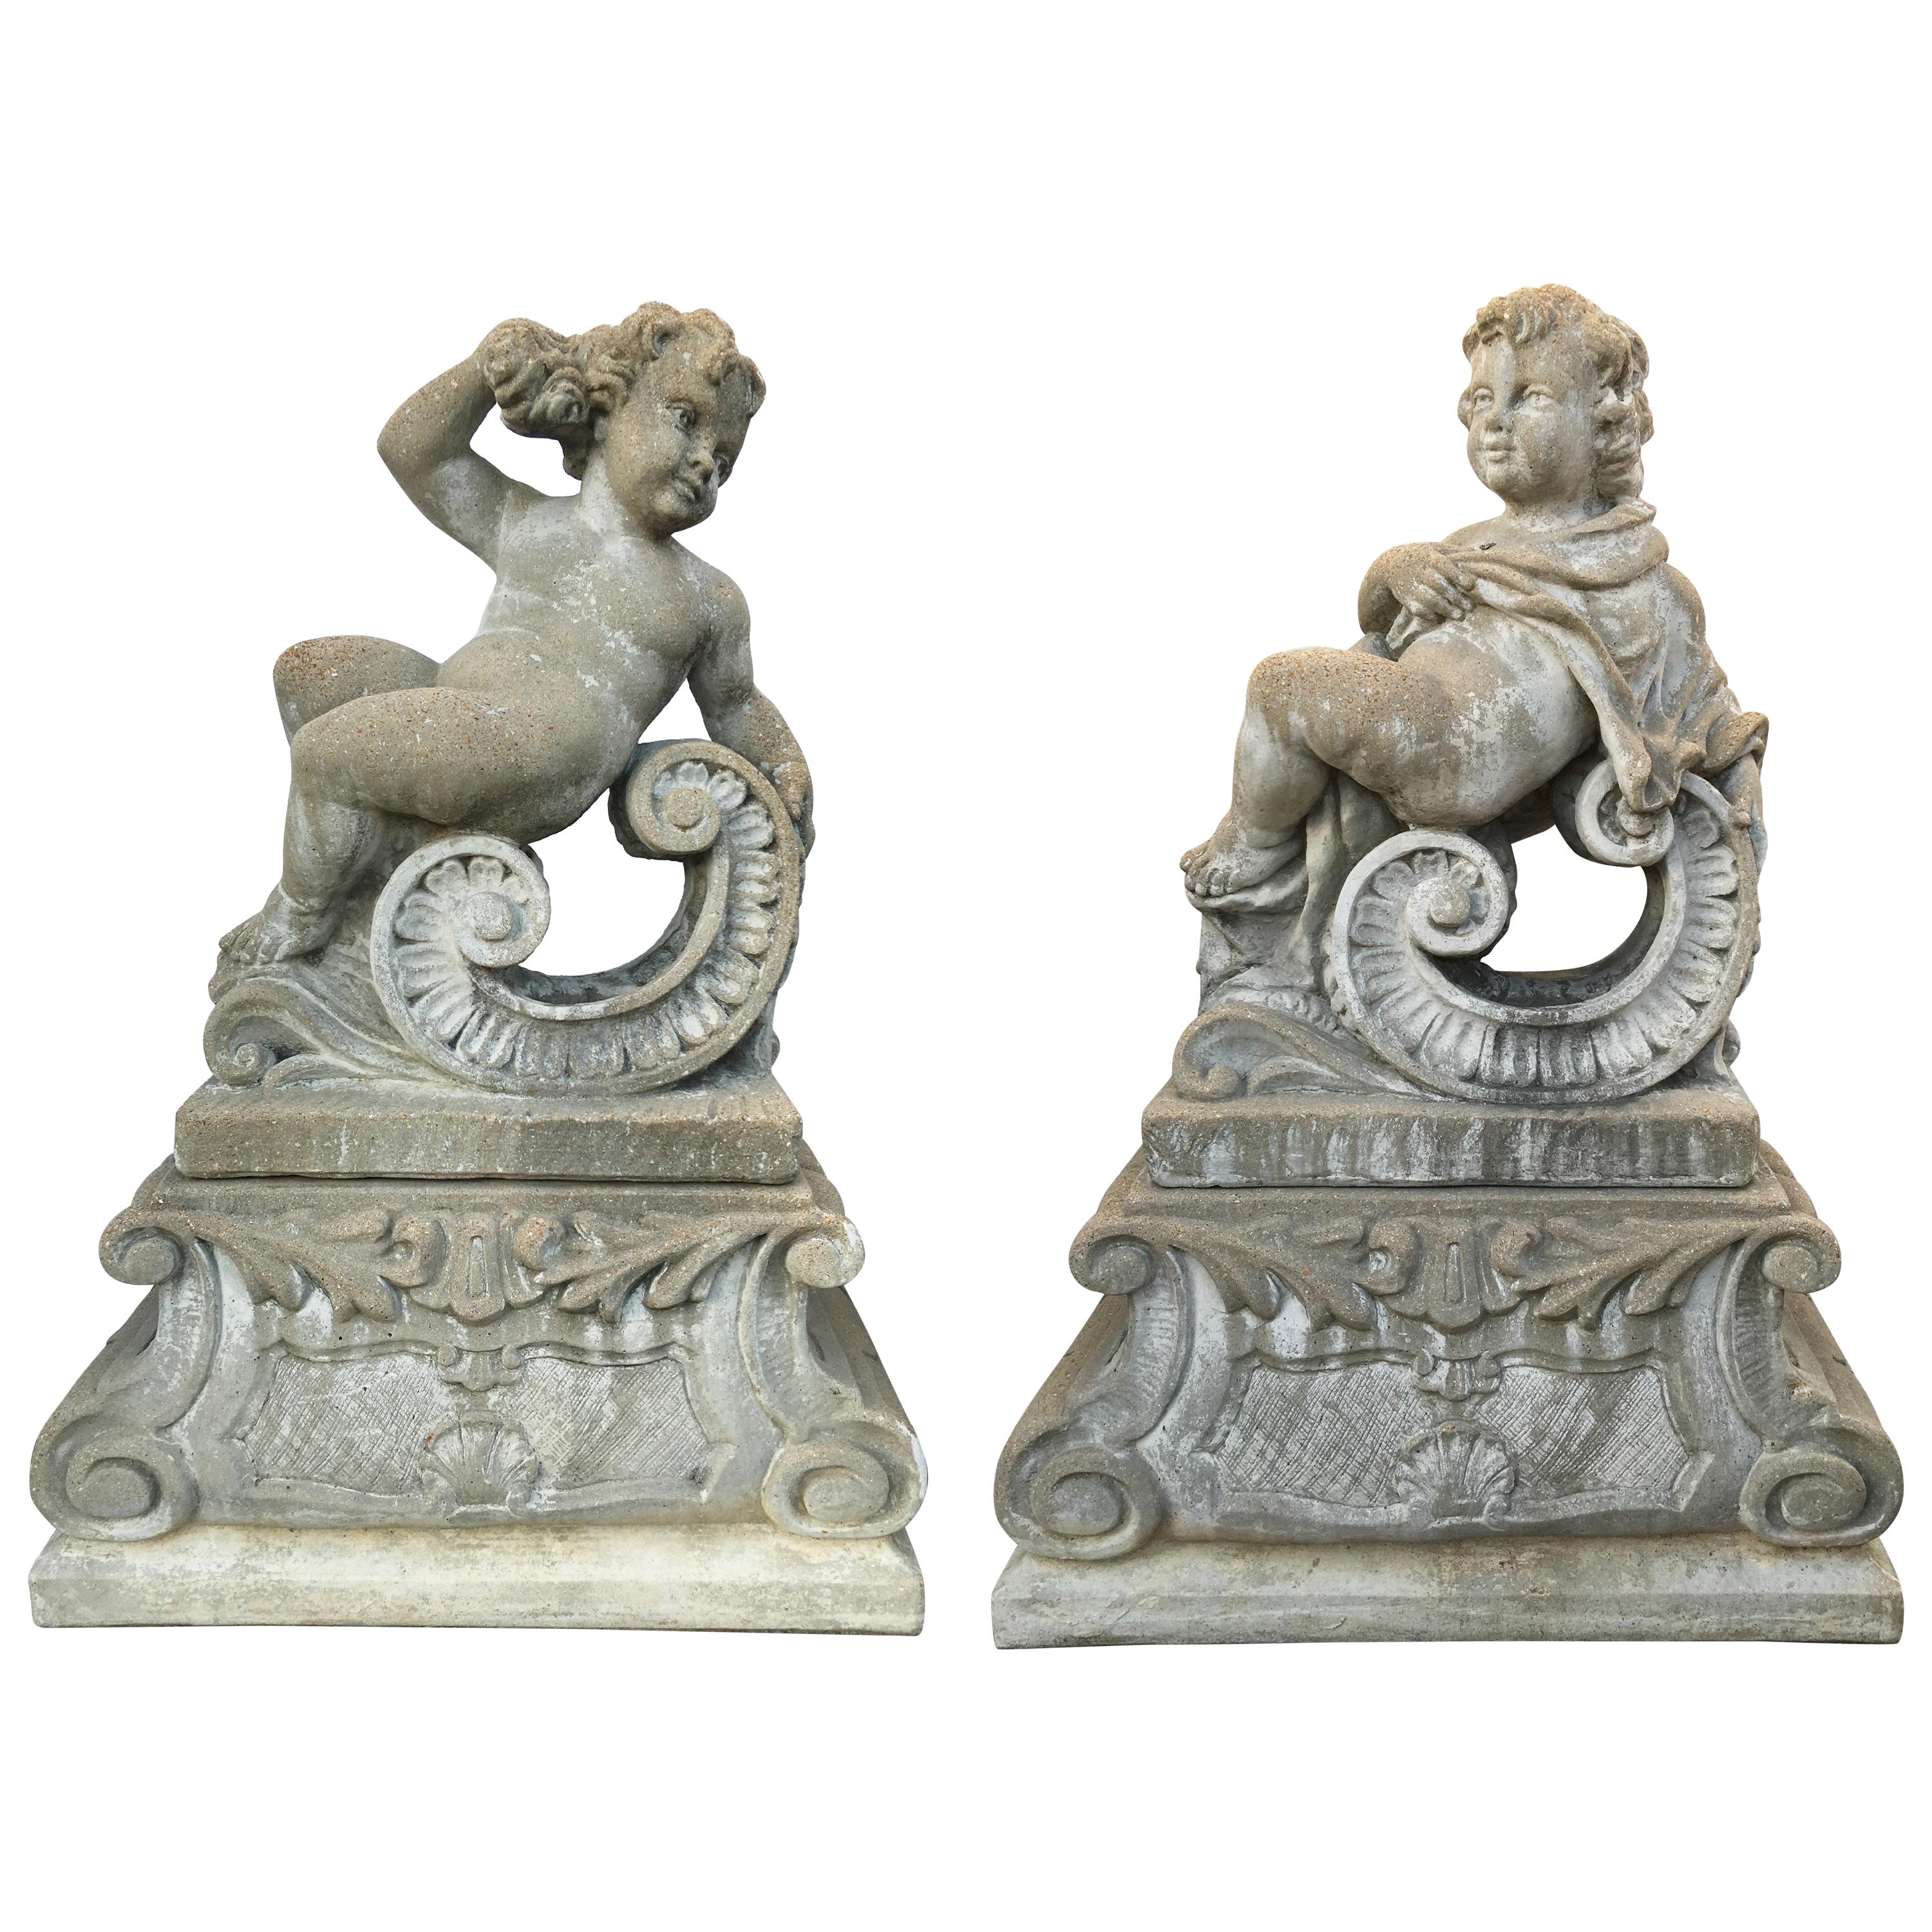 Pair of Classical Stone Composite Putti Garden Statues Holding Roses and Cloth